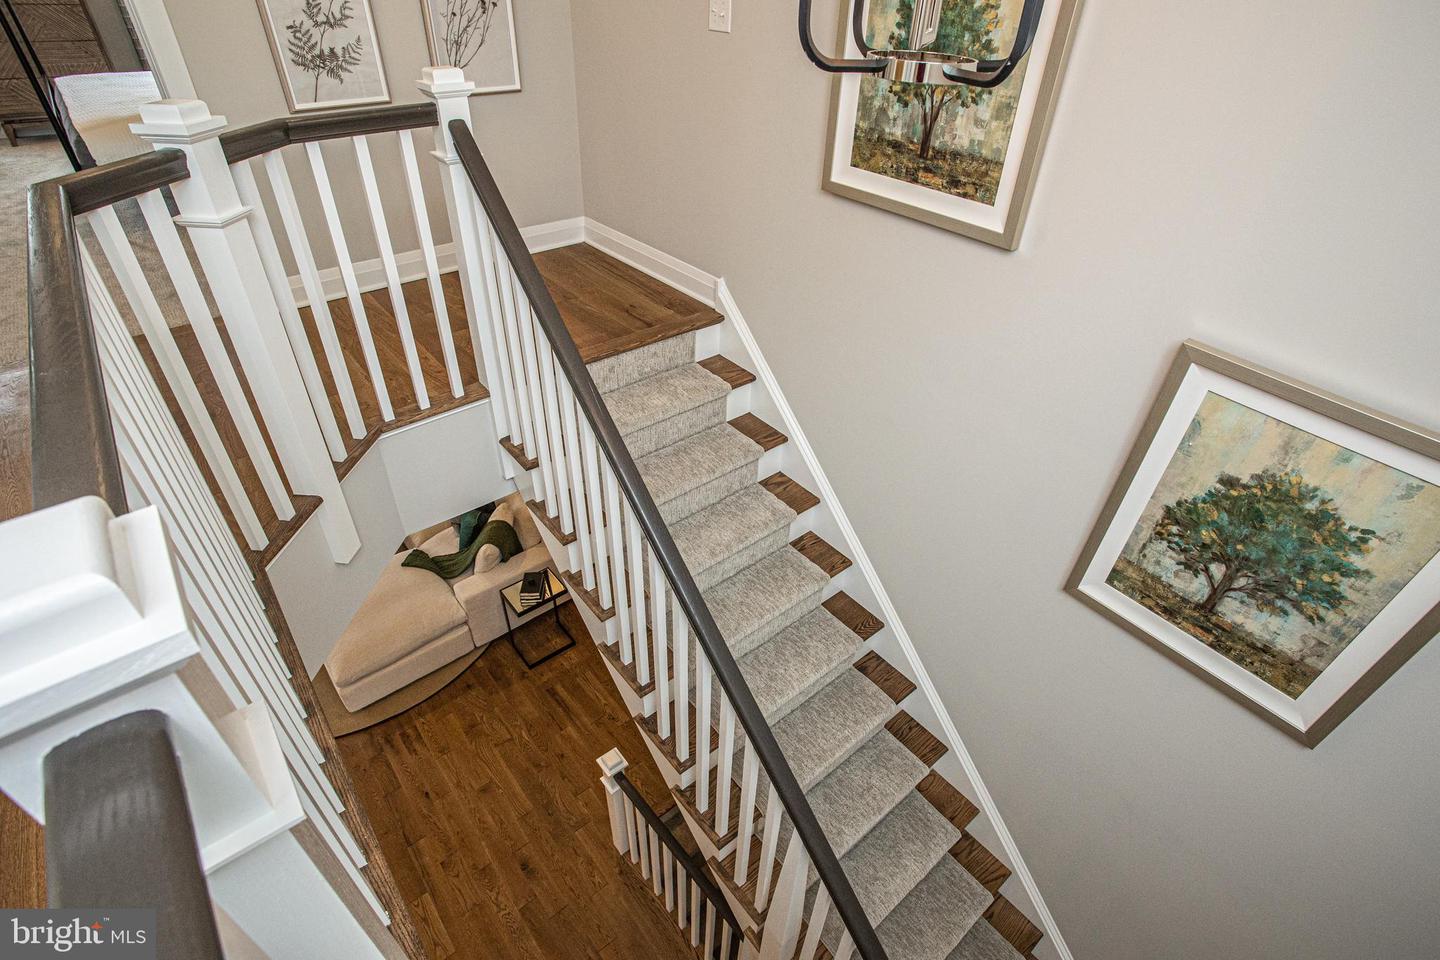 Photo 13 of 27 of 26 Parry Way #Lot 143 townhome